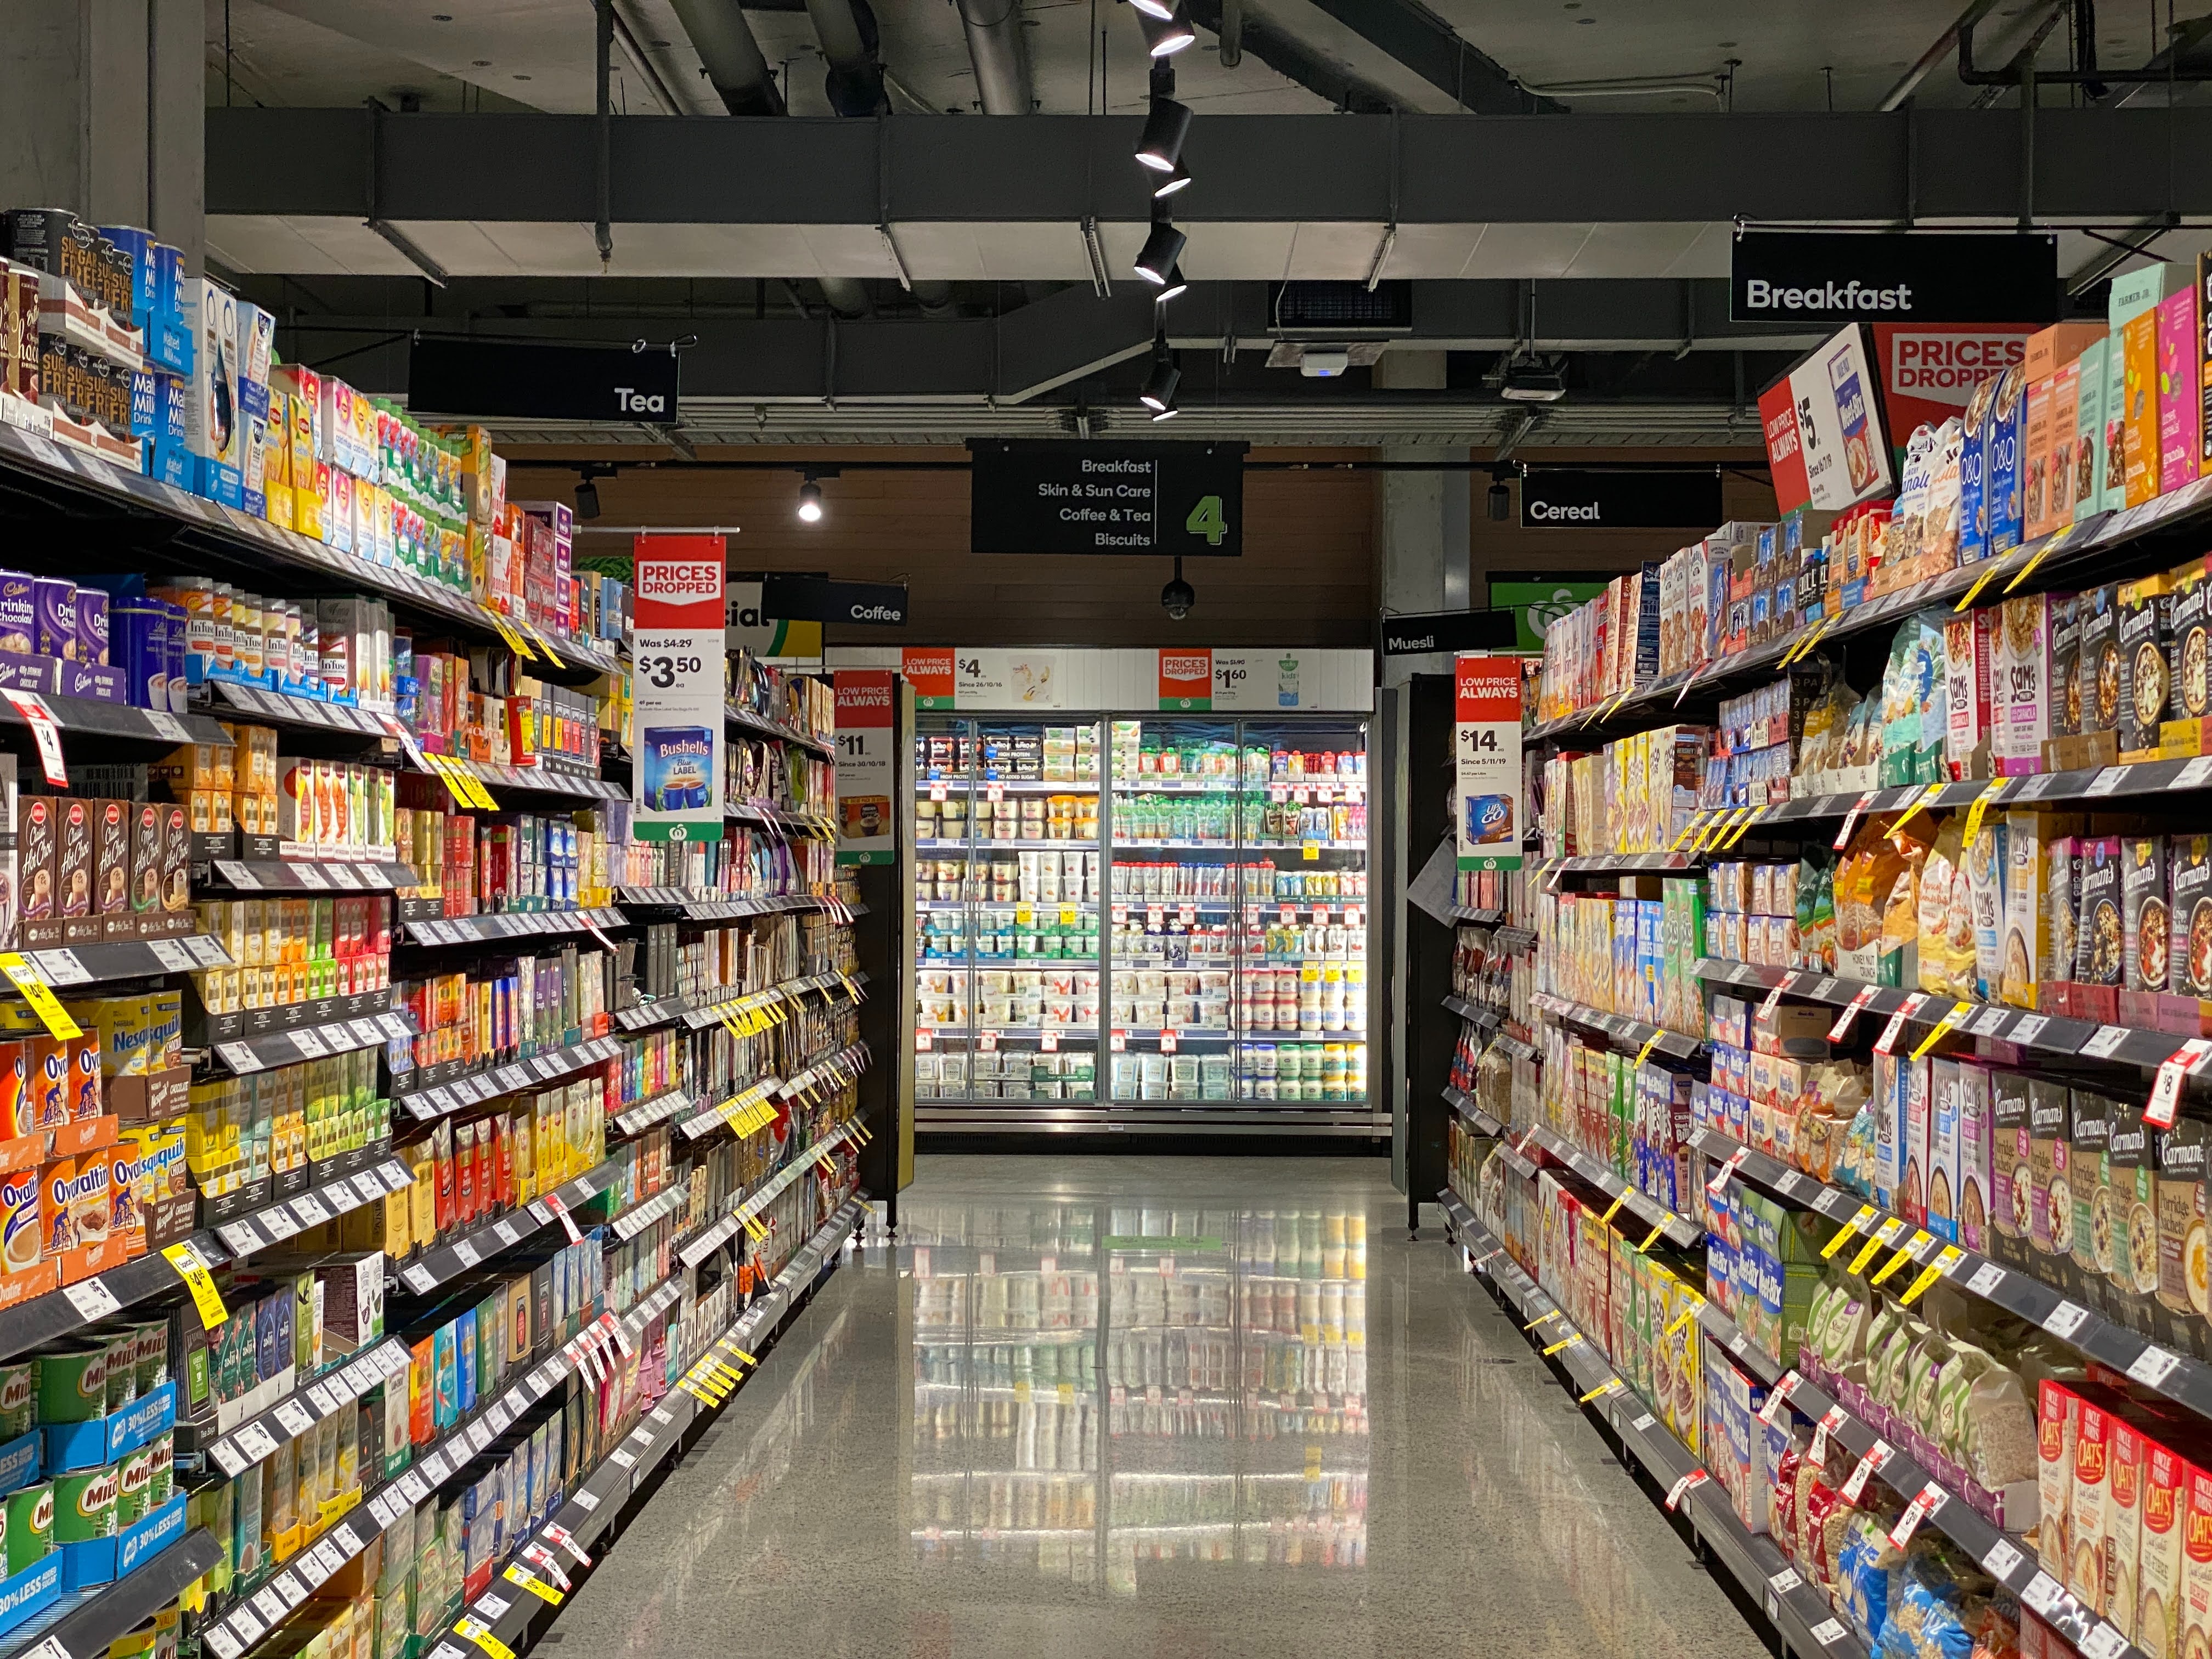 How To Get Your Product in Whole Foods Grocery Stores